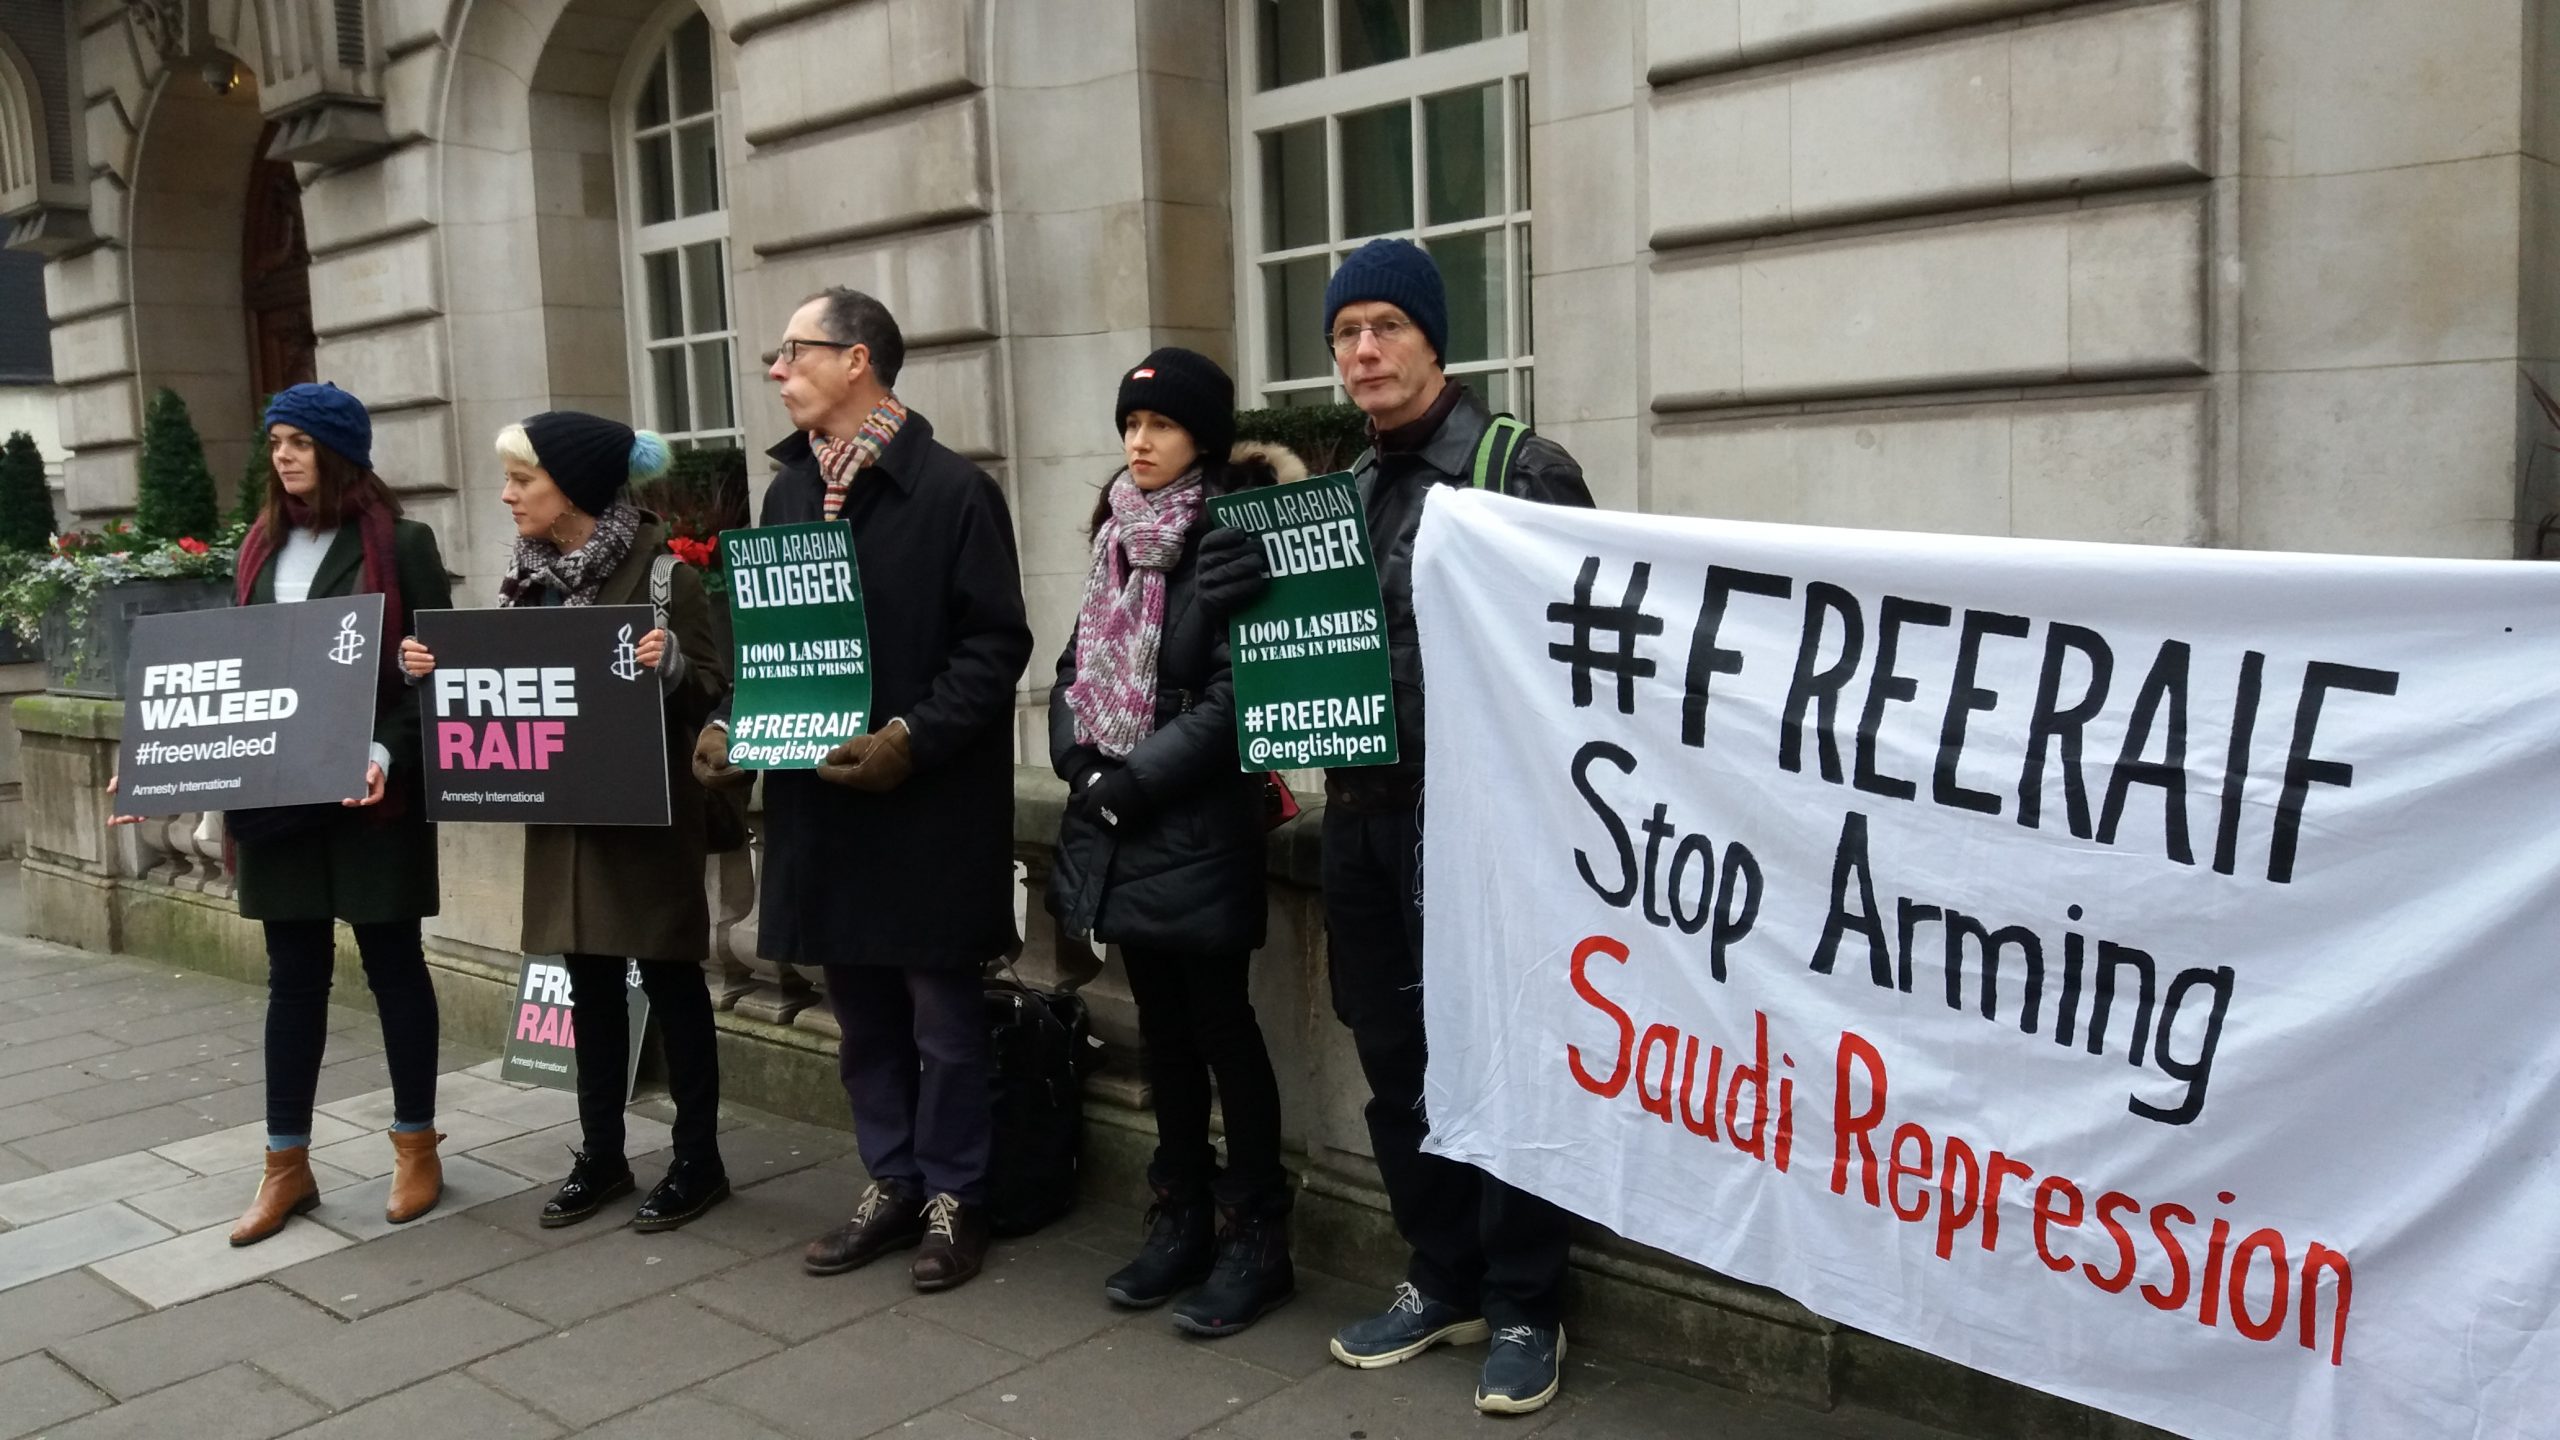 Protesters stand outside the Saudi embassy. They hold placards that read, “Free Raif”, “Free Waleed”, “Saudi Arabian blogger imprisoned - 1000 lashes - 10 years in prison - #FreeRaif @EnglishPEN” and a large banner that says “#FreeRaif, Stop Arming Saudi Repression”